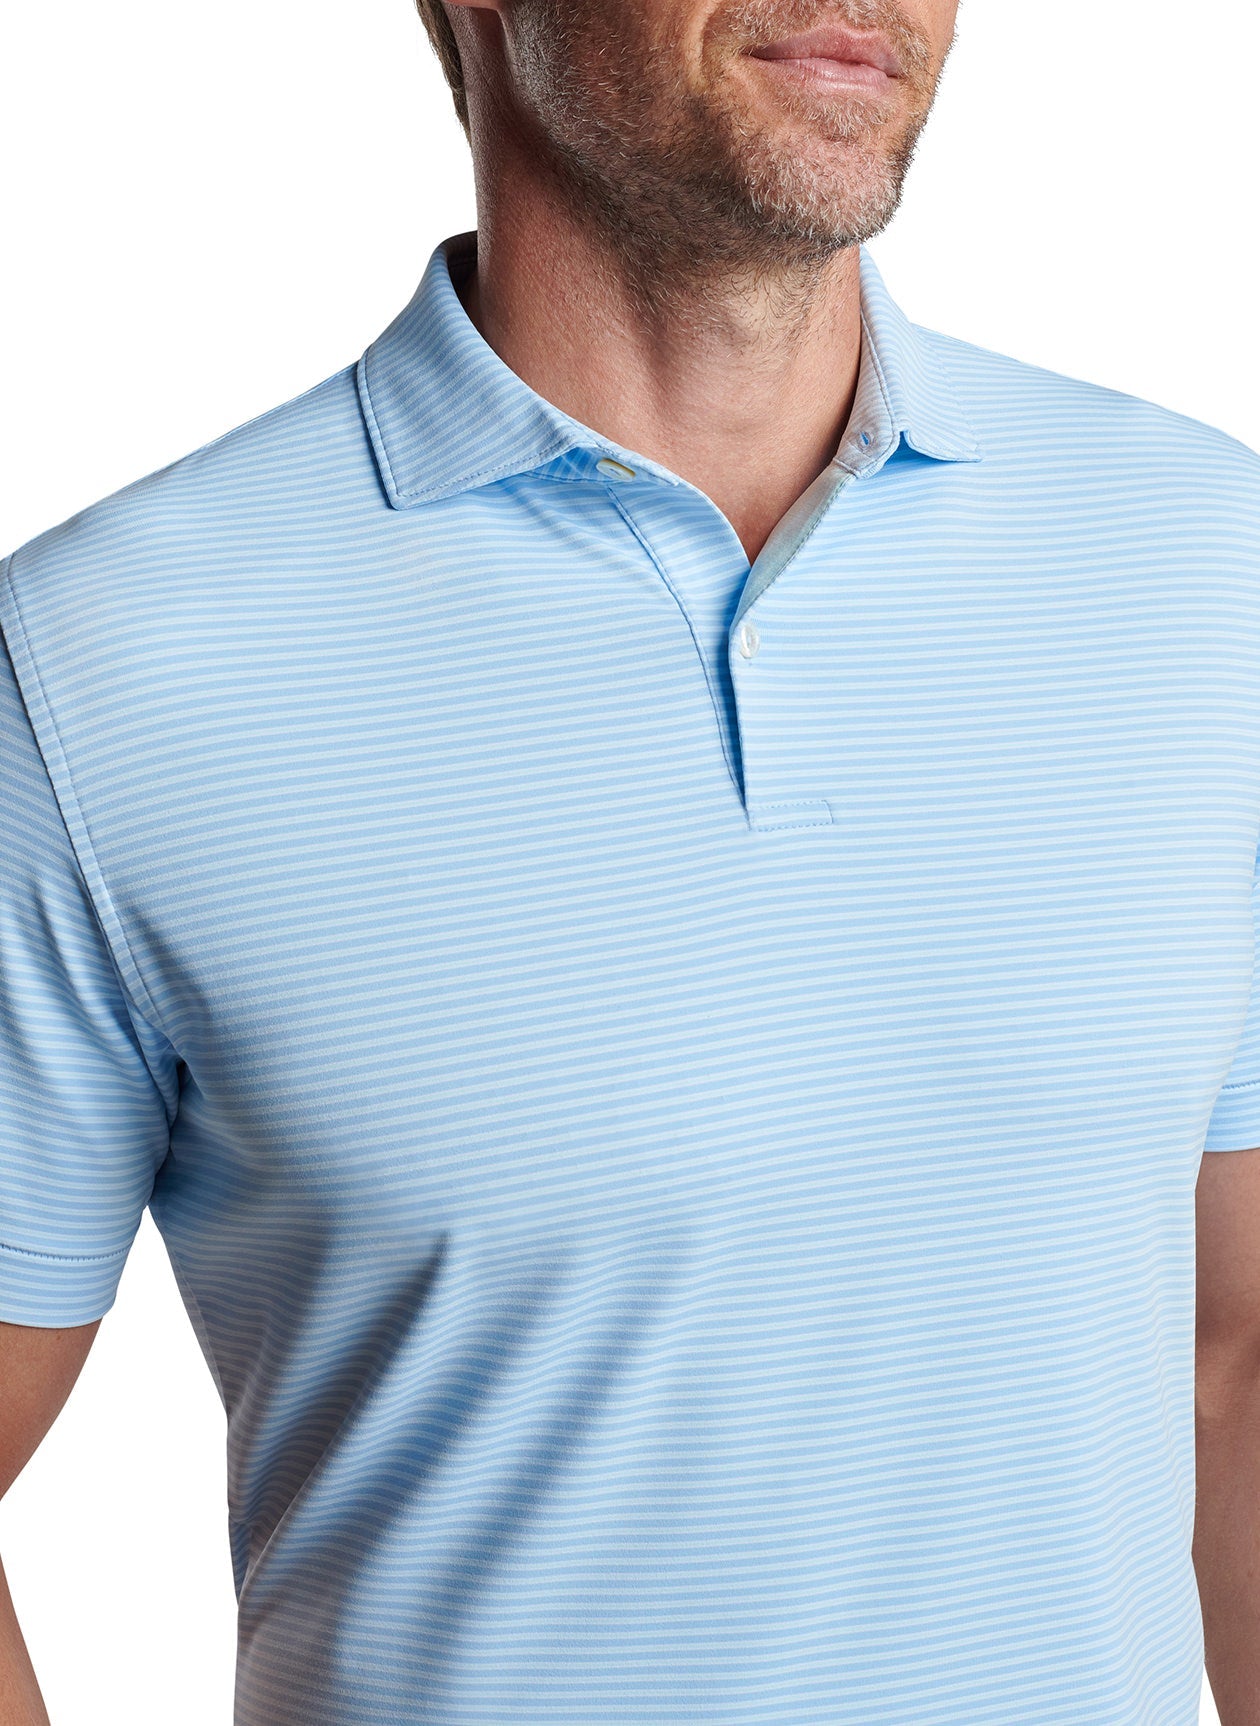 Peter Millar Ambrose Performance Jersey Customized Polos, Blue Frost